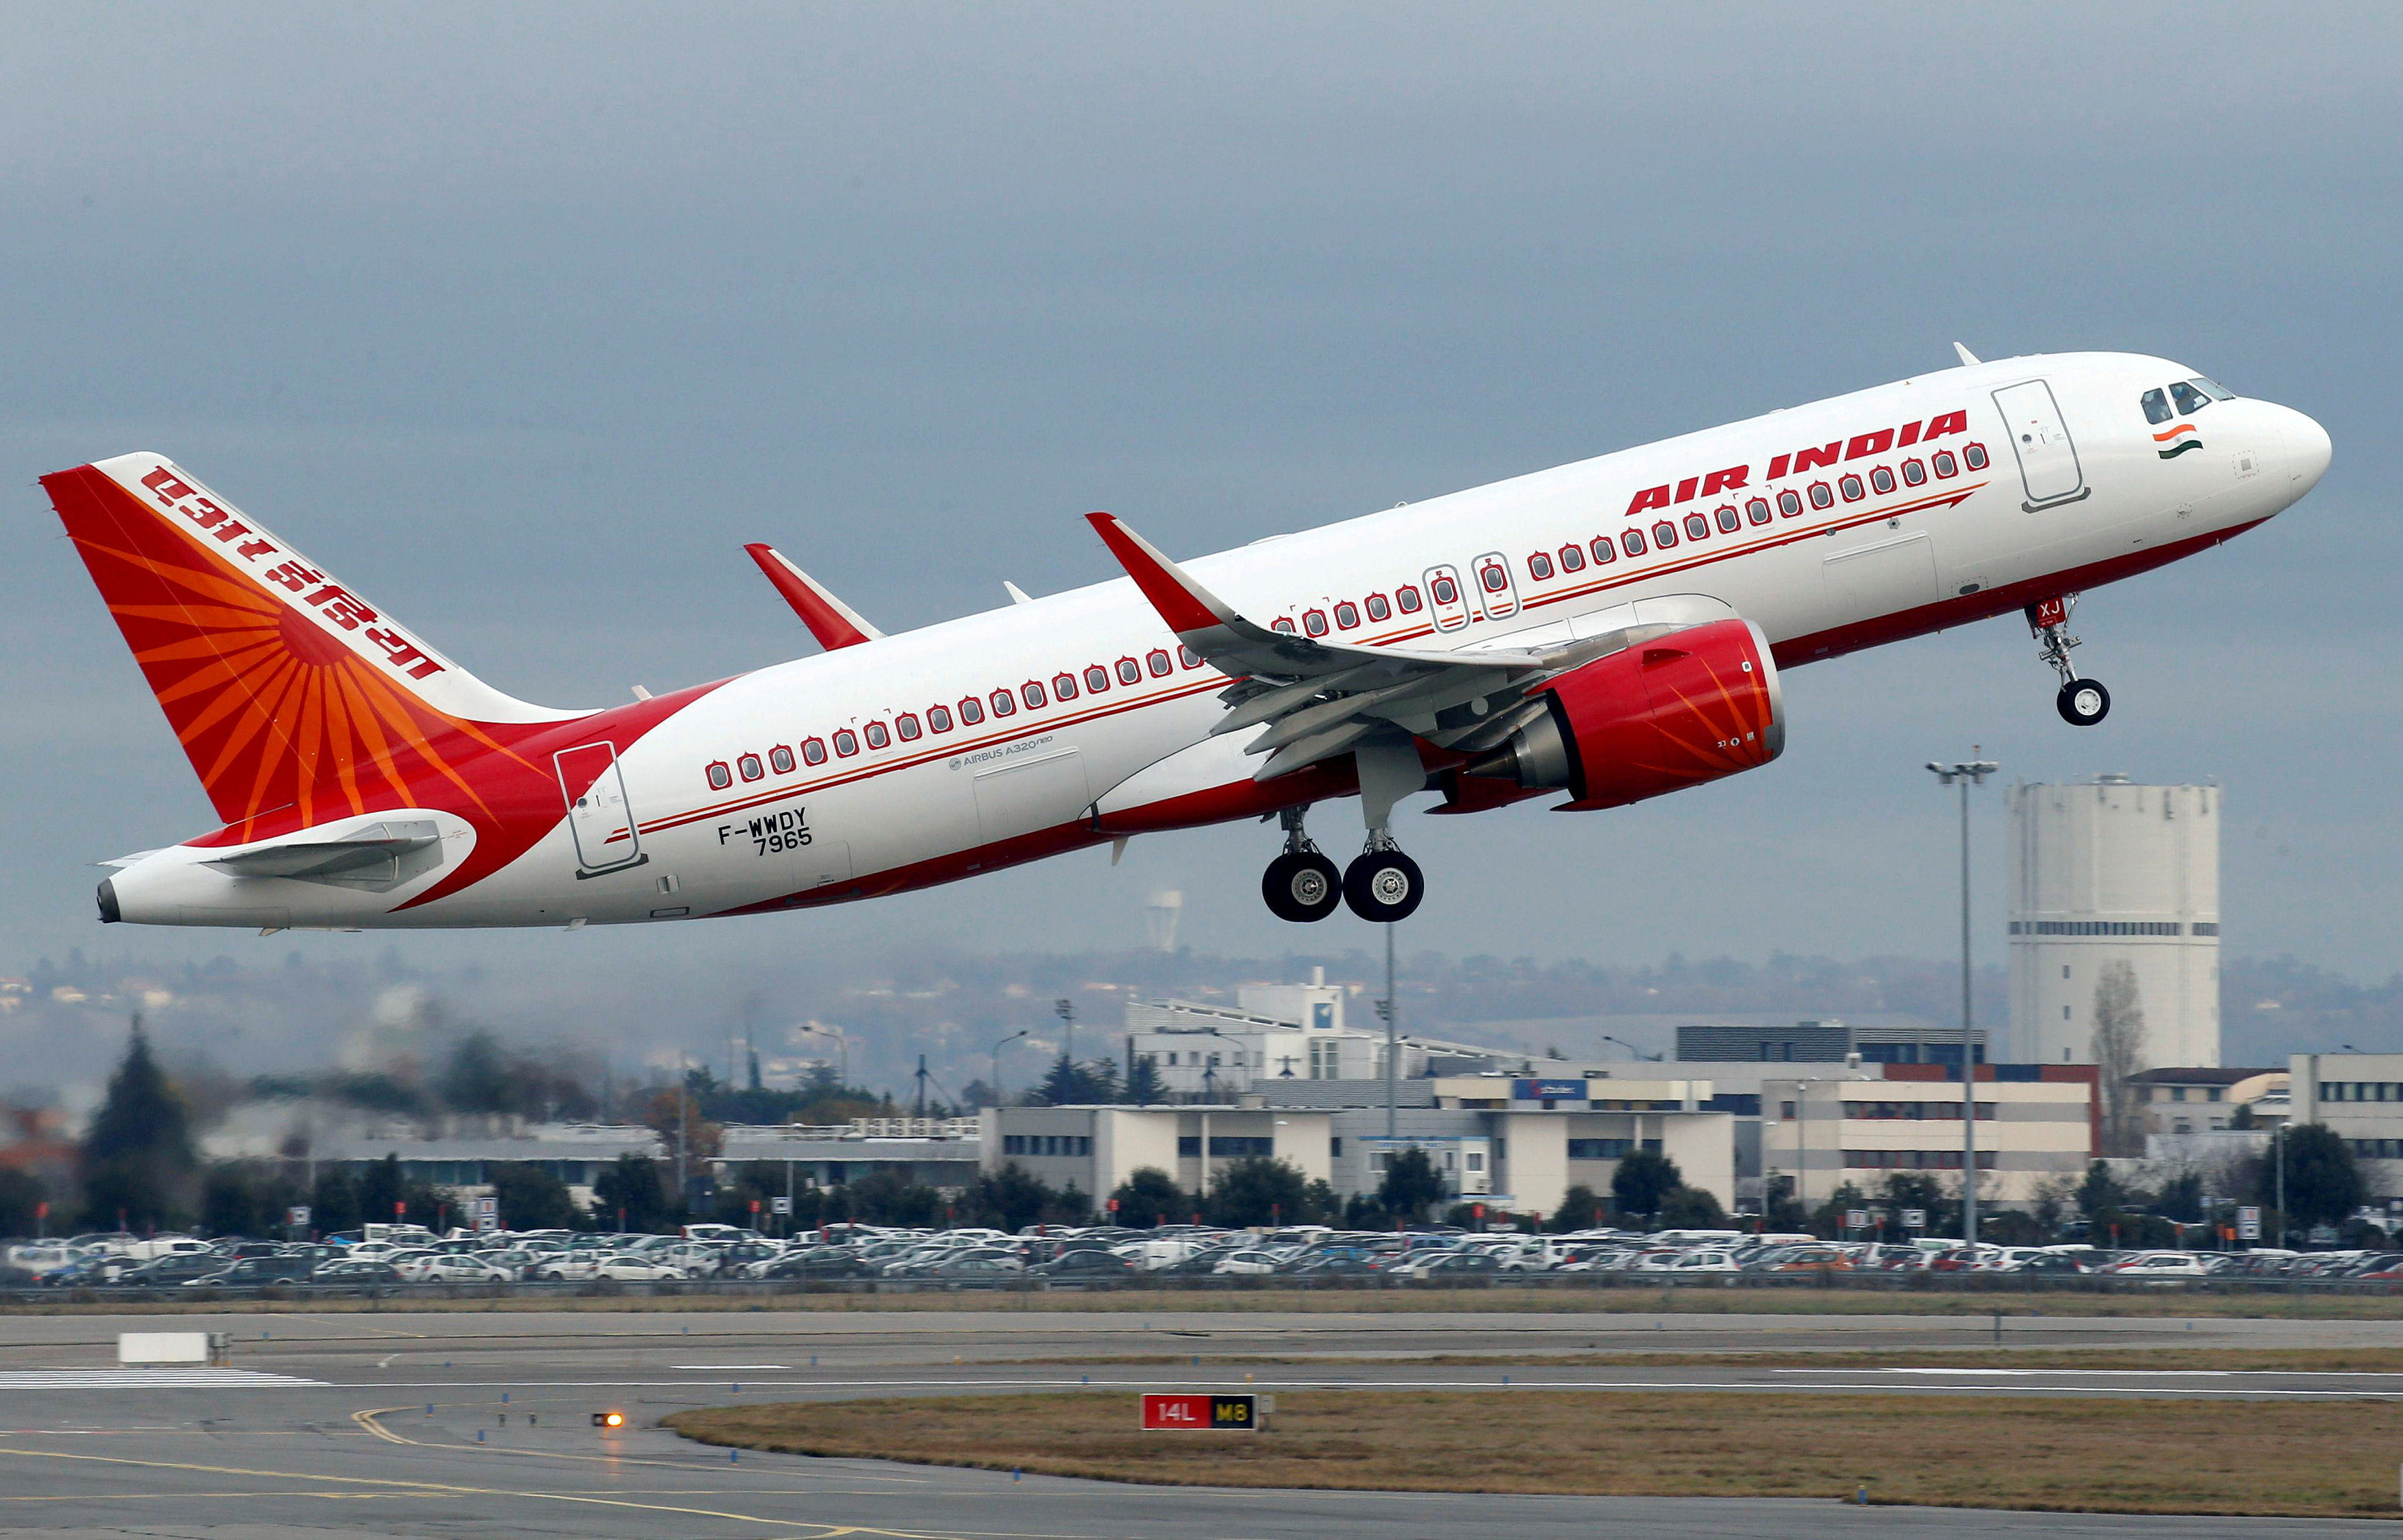 The government had on Tuesday sought Parliament's approval for grant of Rs 980 crore as part of equity infusion into Air India under the turnaround plan. Reuters file photo